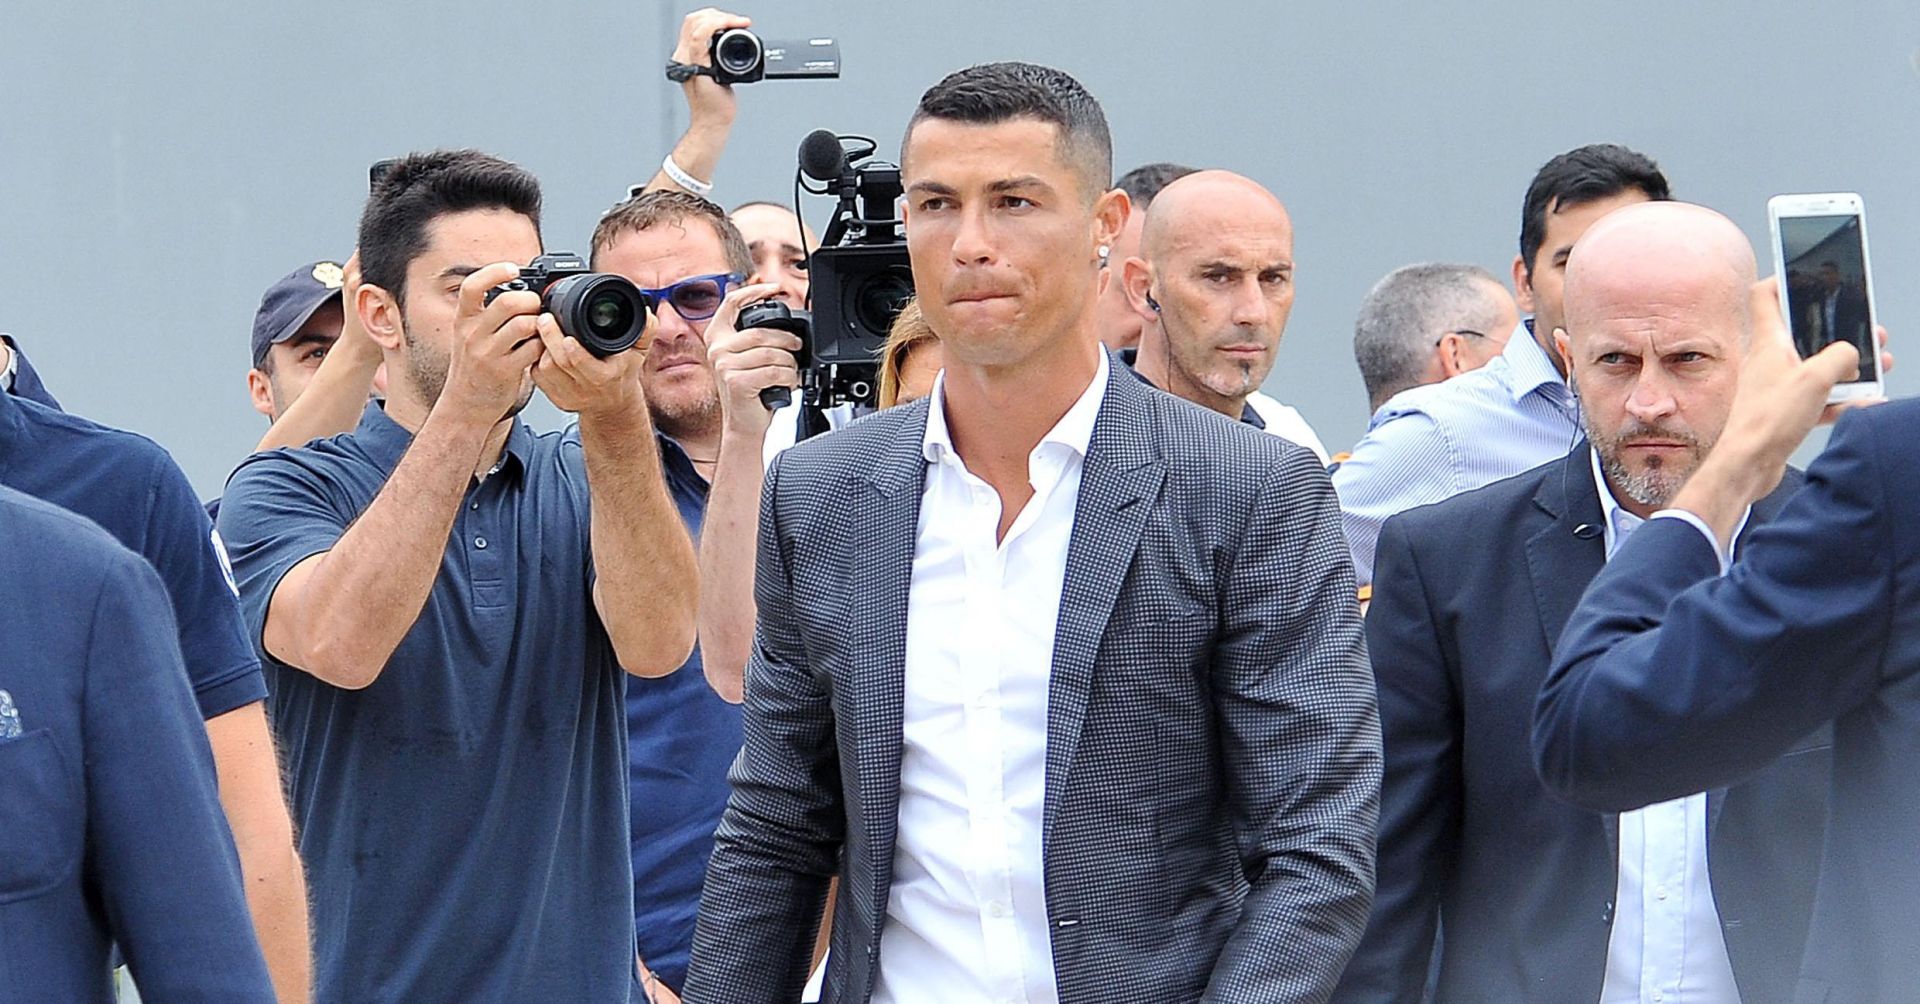 epa06892567 New Juventus soccer player Cristiano Ronaldo (C) of Portugal arrives at Juventus J Medical in Turin, Italy, 16 July 2018. Cristiano Ronaldo joins Italian Serie A side Juventus FC.  EPA/ALESSANDRO DI MARCO